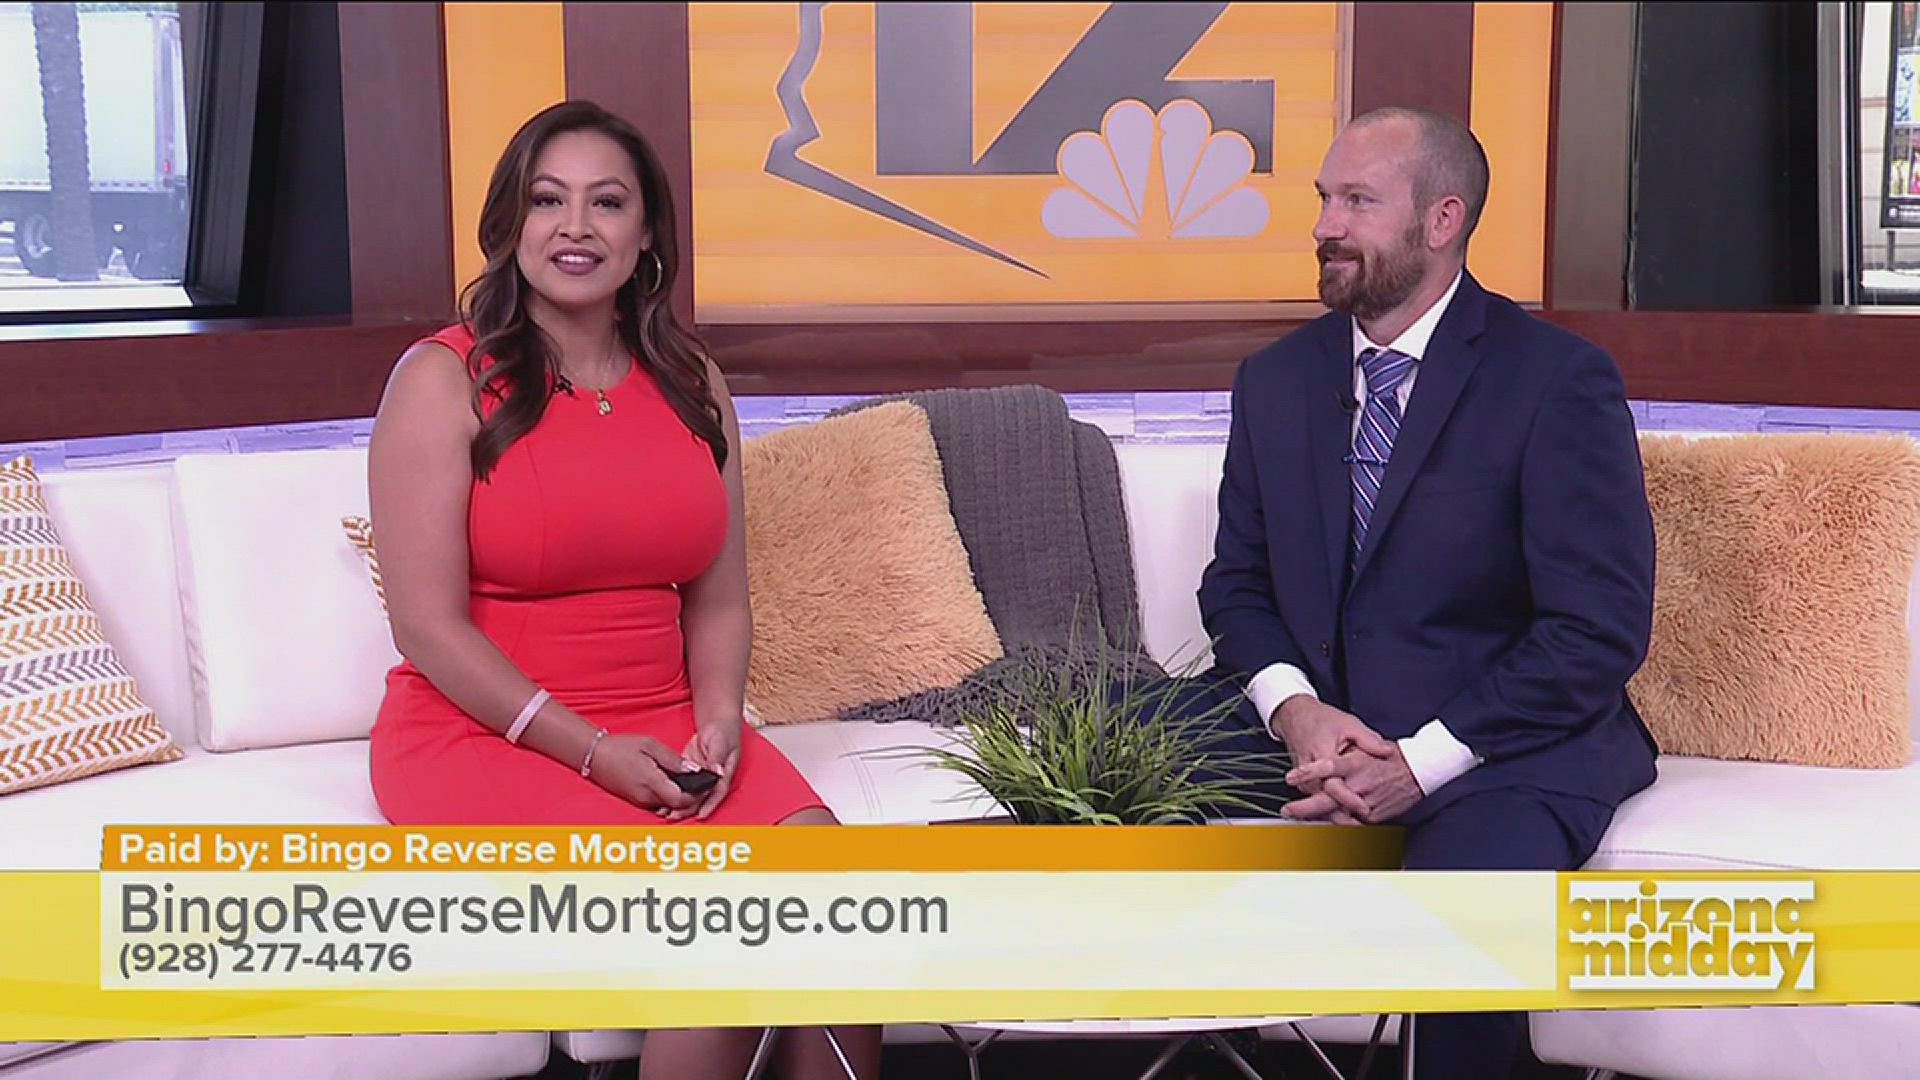 Jason McAtee with Bingo Reverse Mortgage shares how home equity can help stretch their retirement budget.